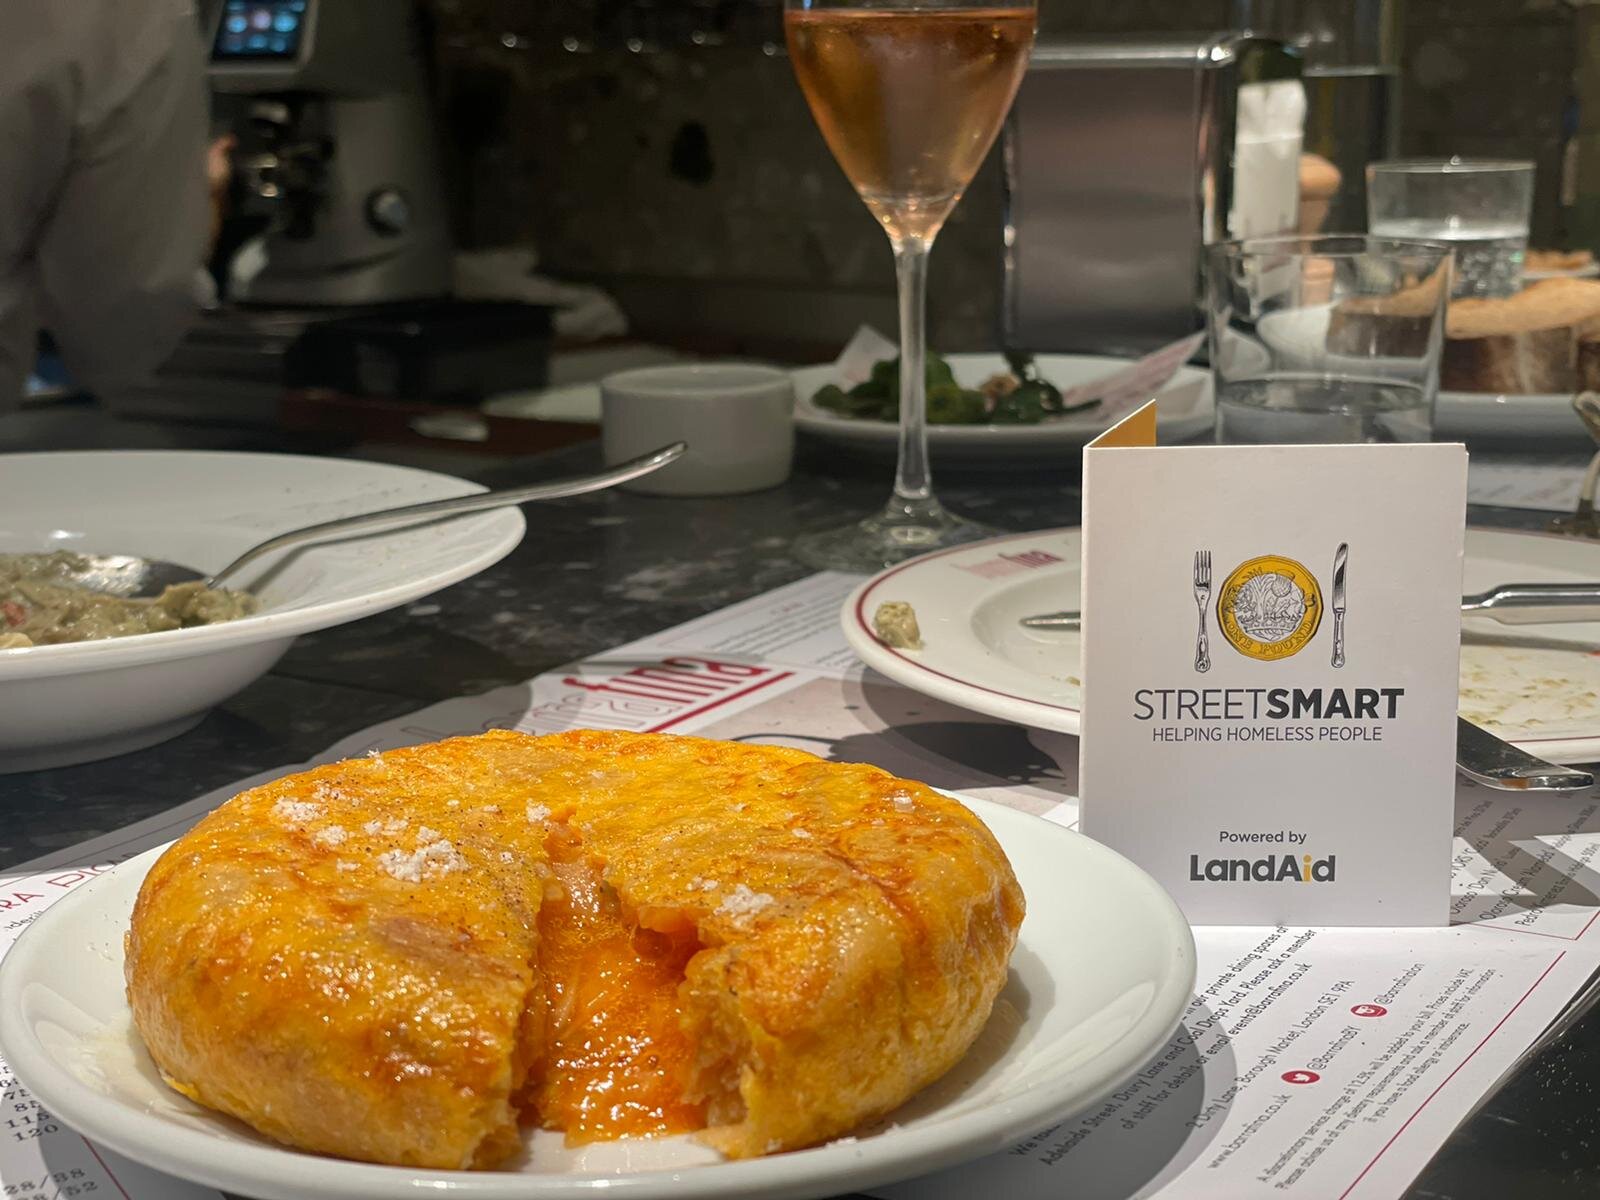 Over 540 restaurants team up with StreetSmart to support the homeless